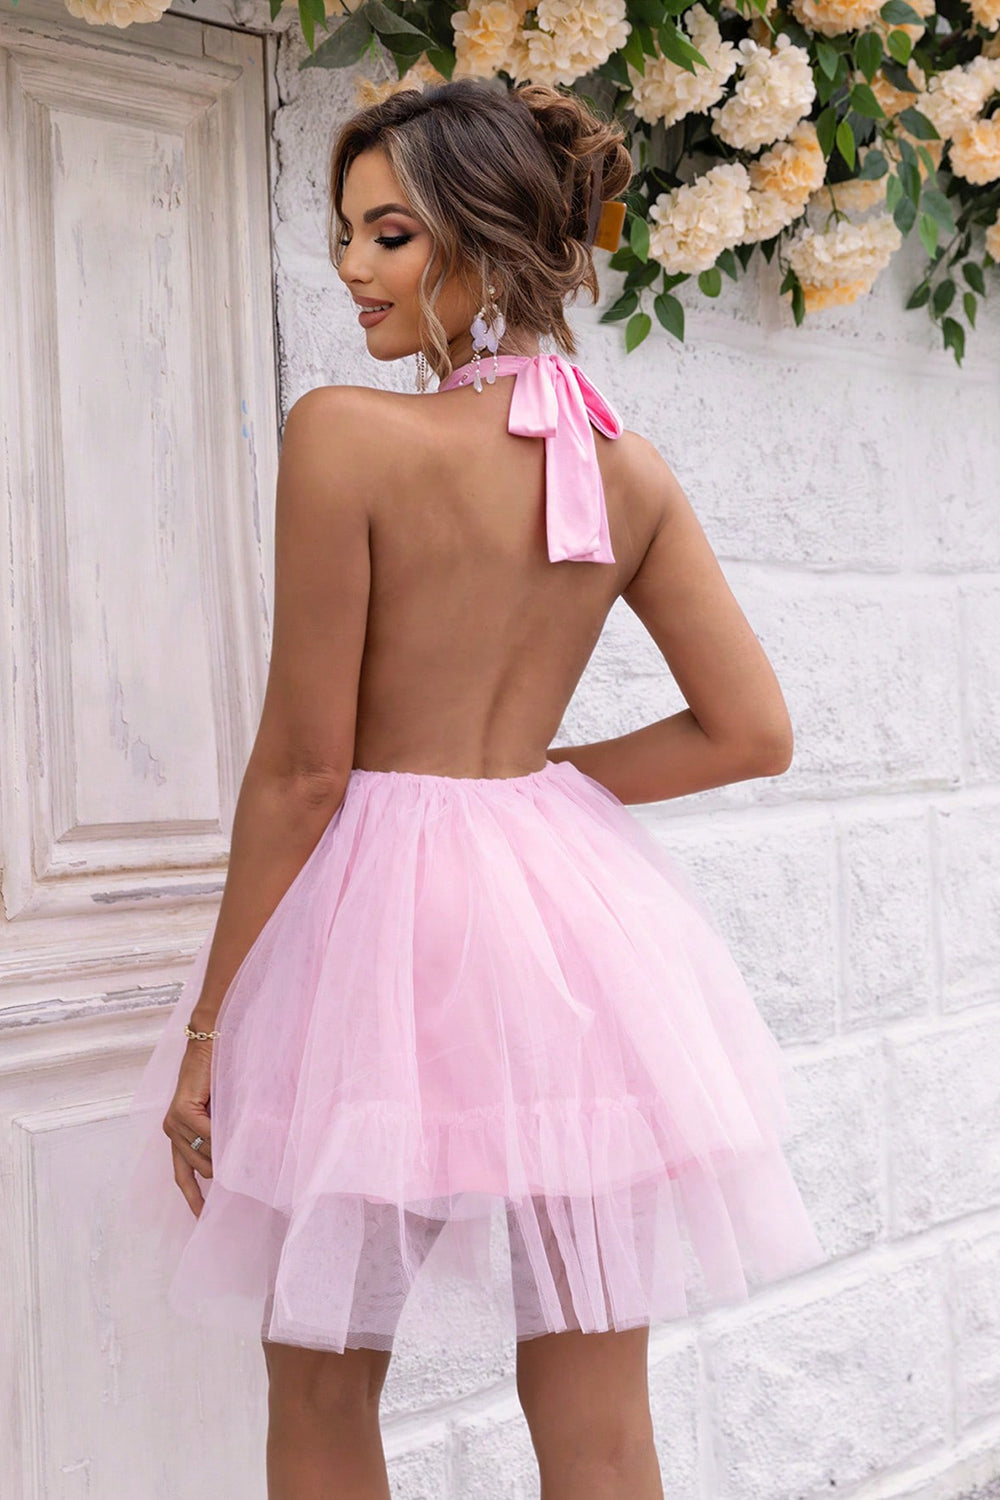 Dazzling halter neck dress with a backless design, available in white, blue, and pink. Perfect for any elegant occasion